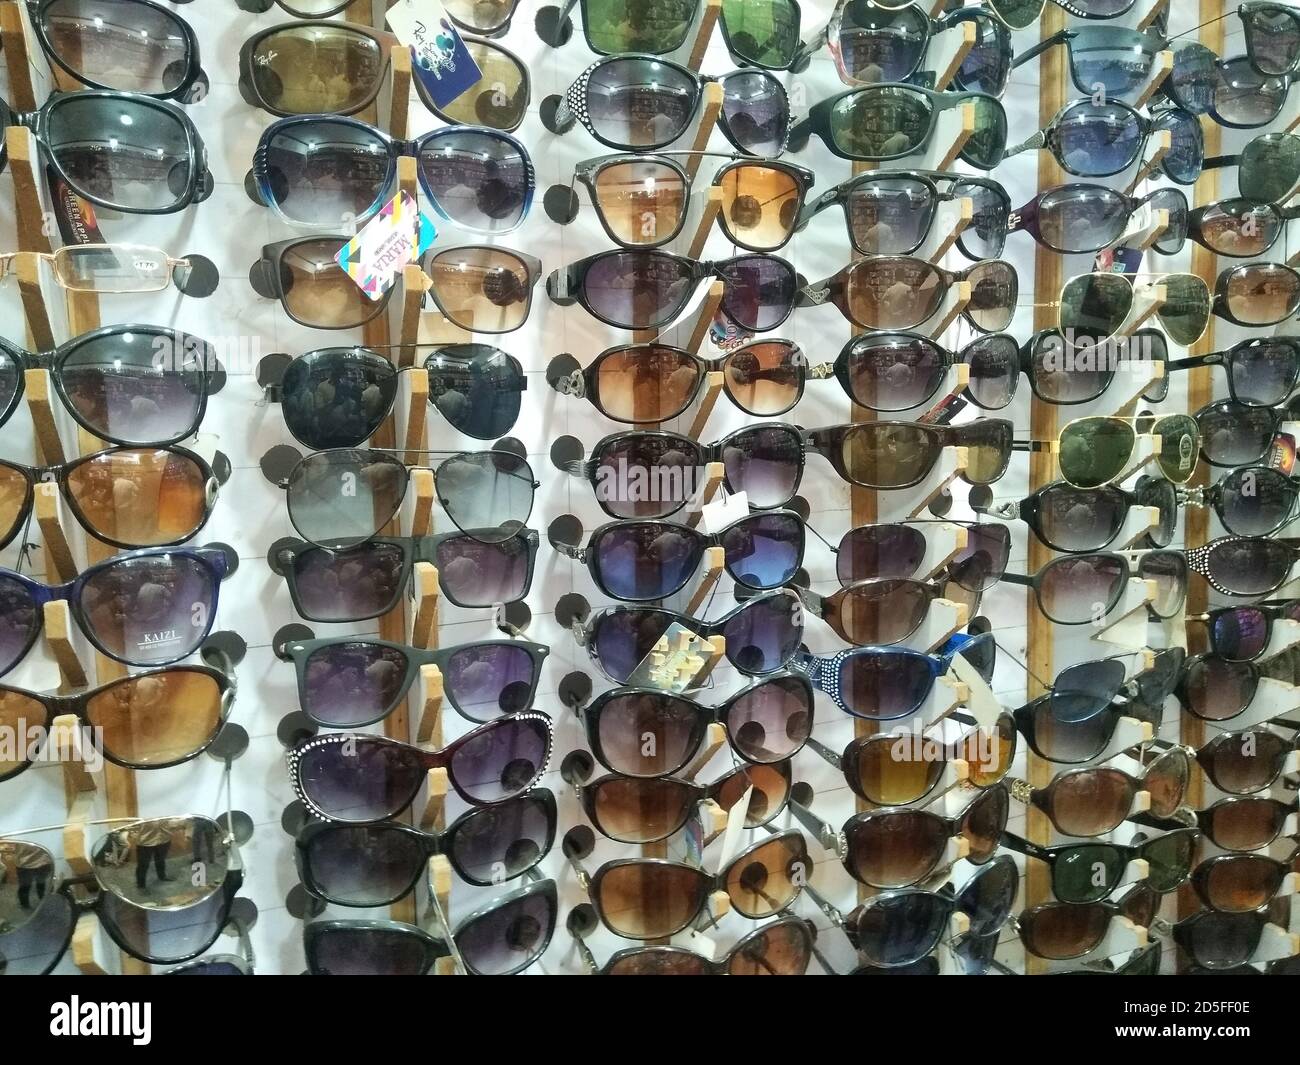 Utter pardesh , india - eye goggles , A picture of eye goggles in noida 20 september 2020 Stock Photo